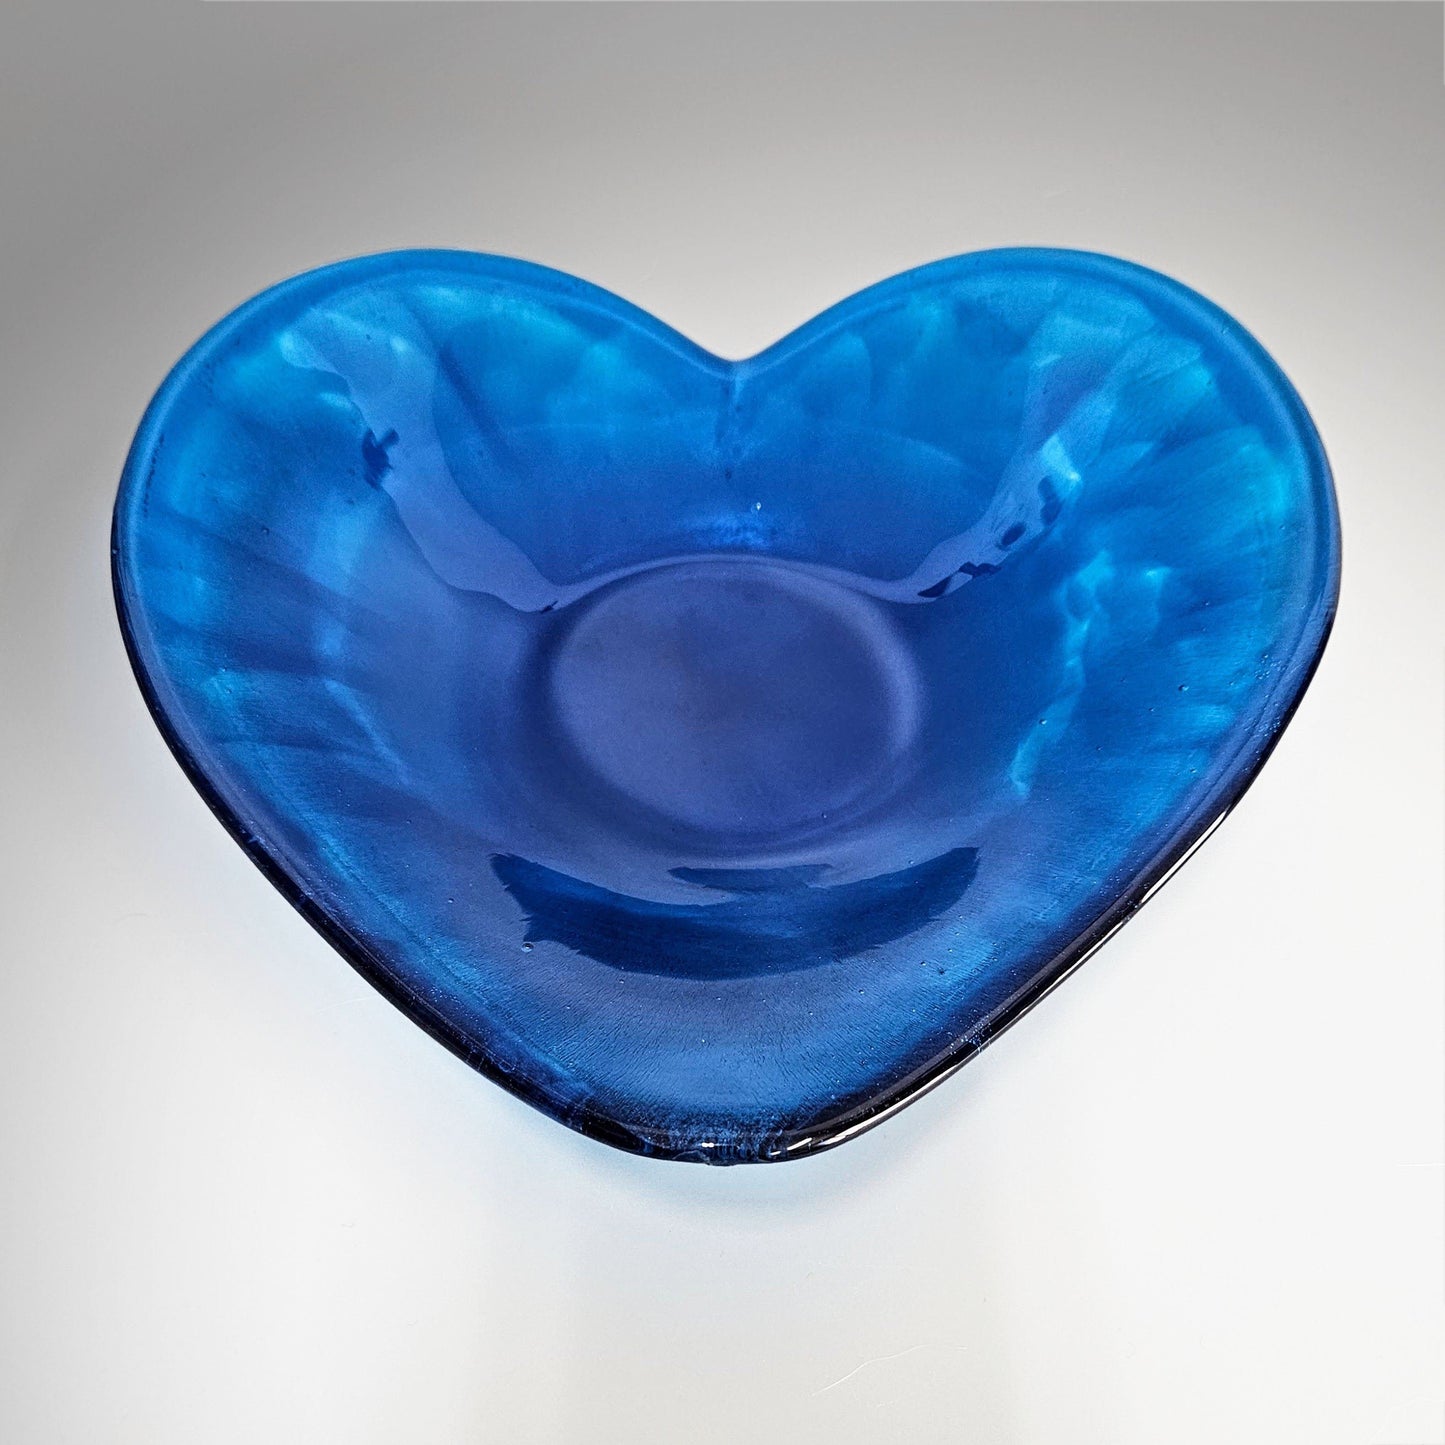 Glass Art Heart Shaped Bowl in Turquoise Blue